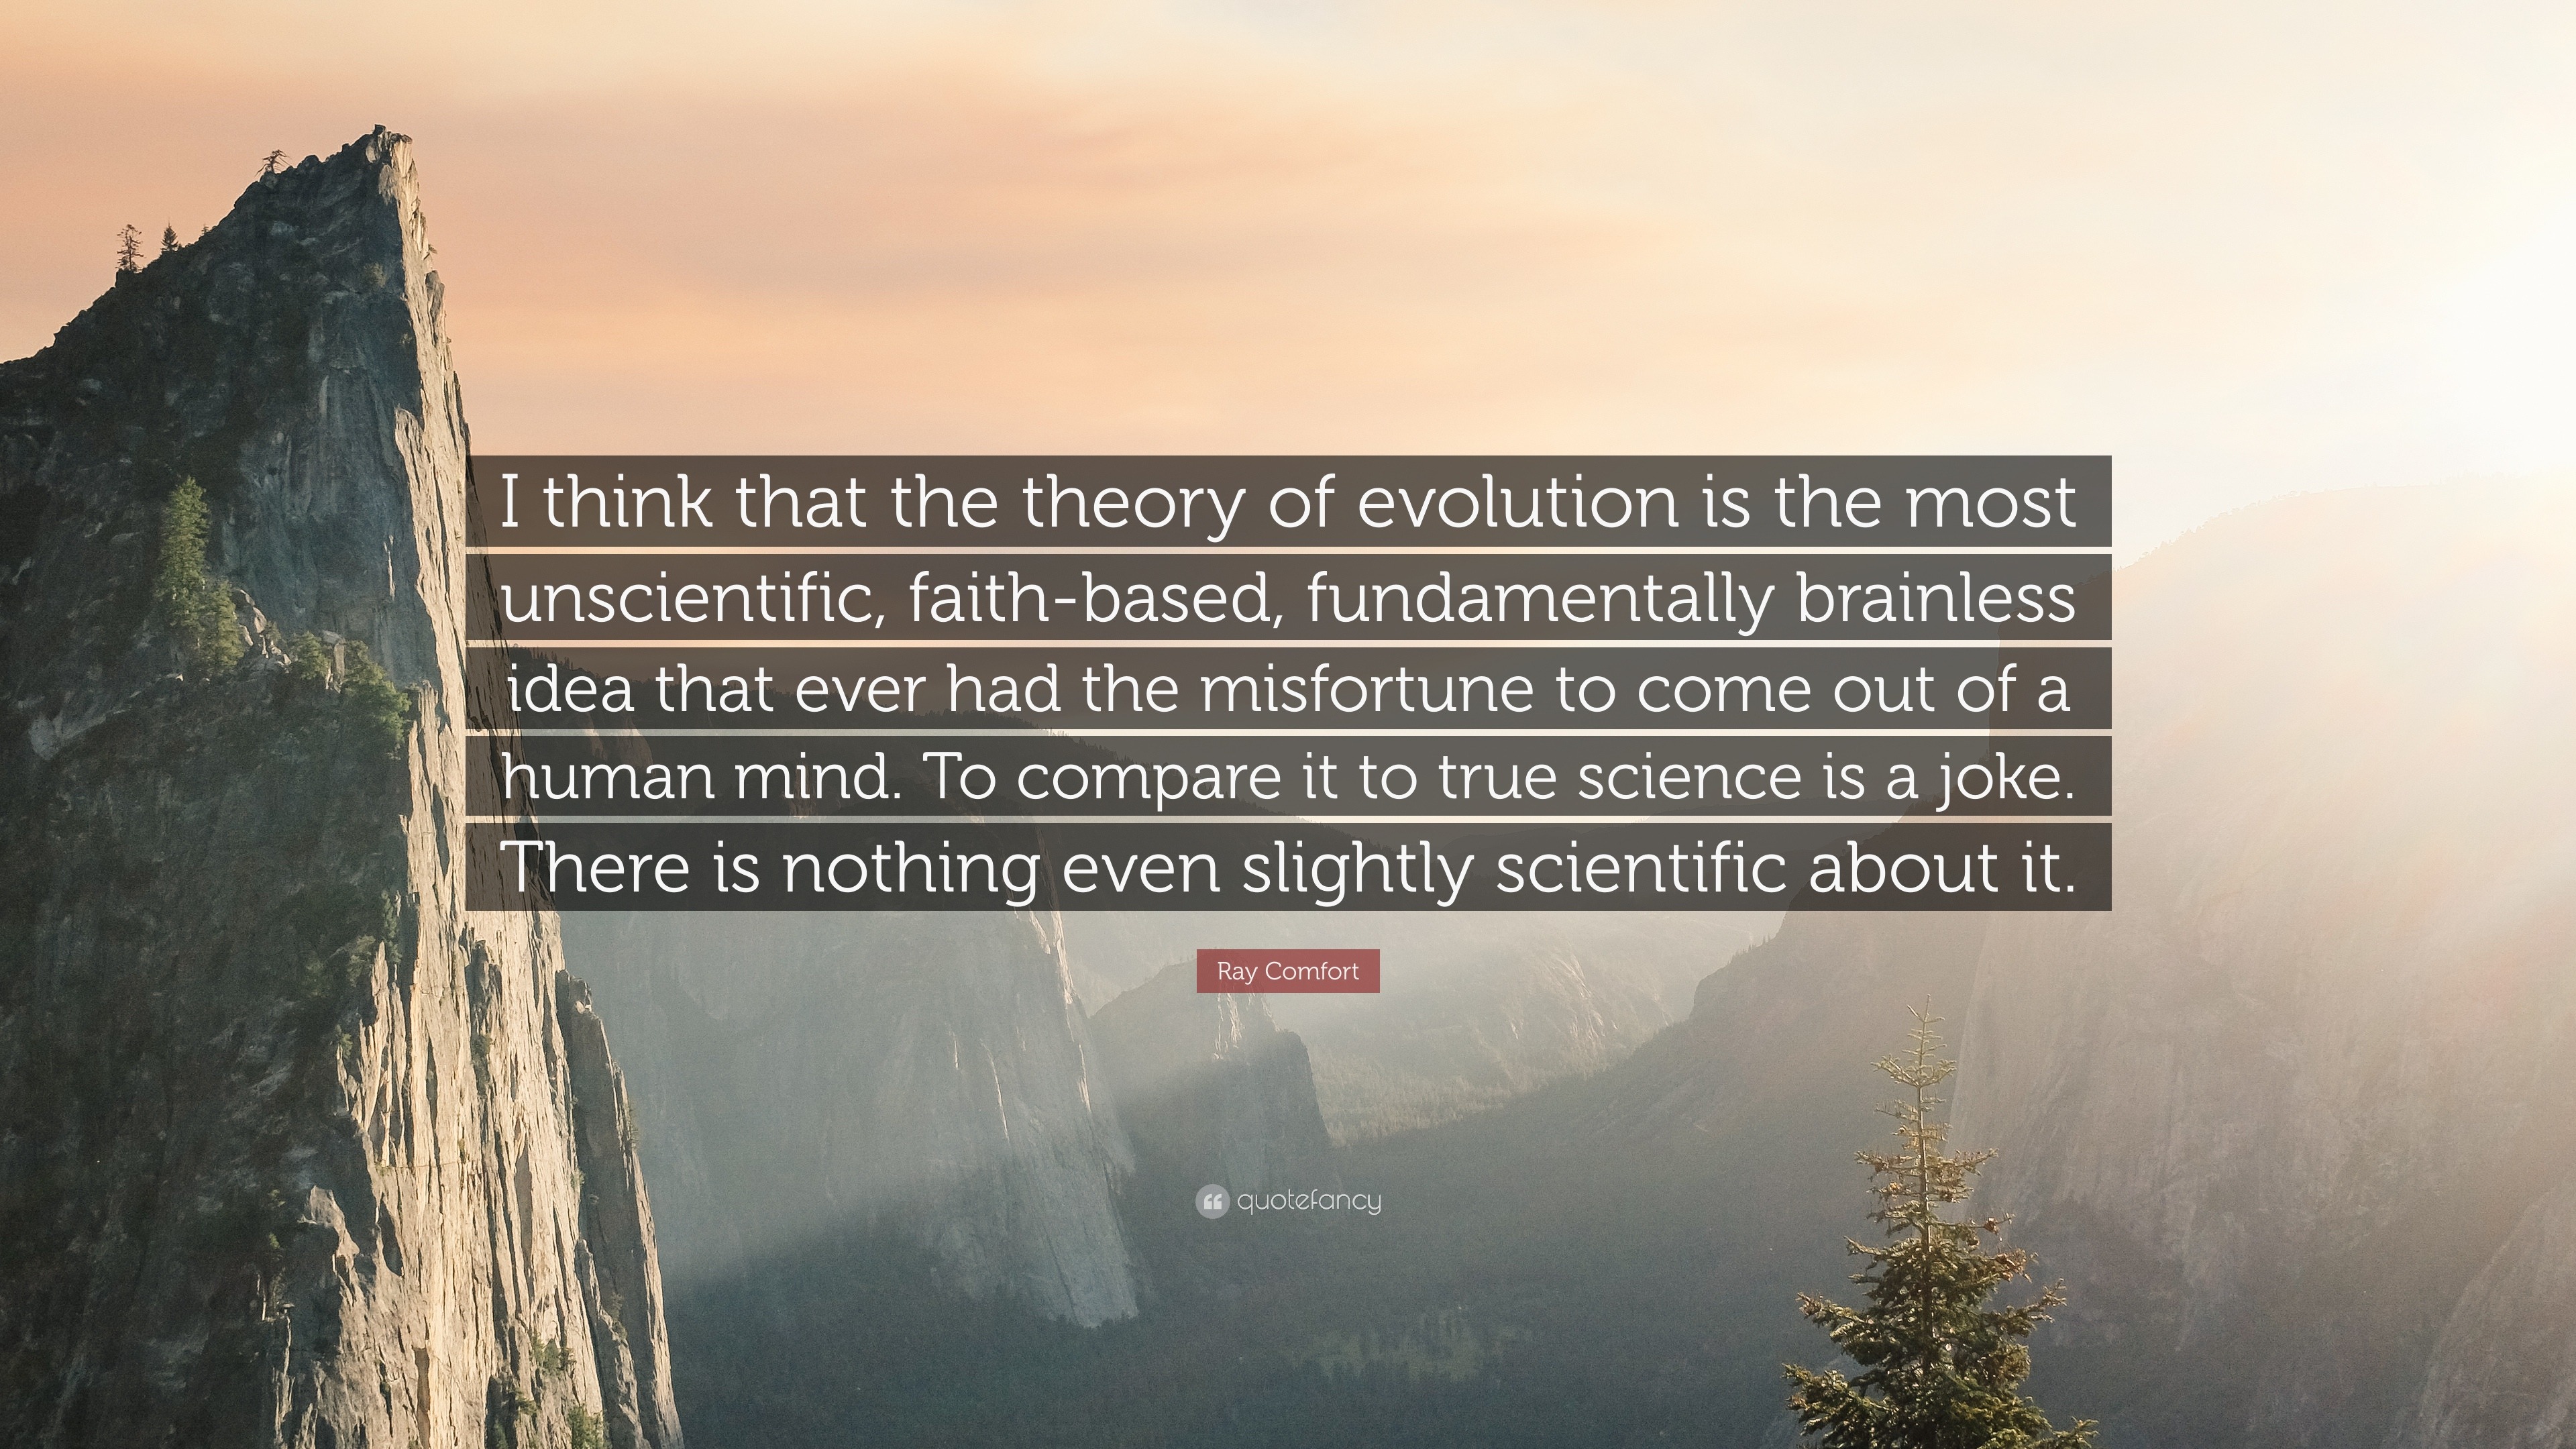 Ray Comfort Quote: “I think that the theory of evolution is the